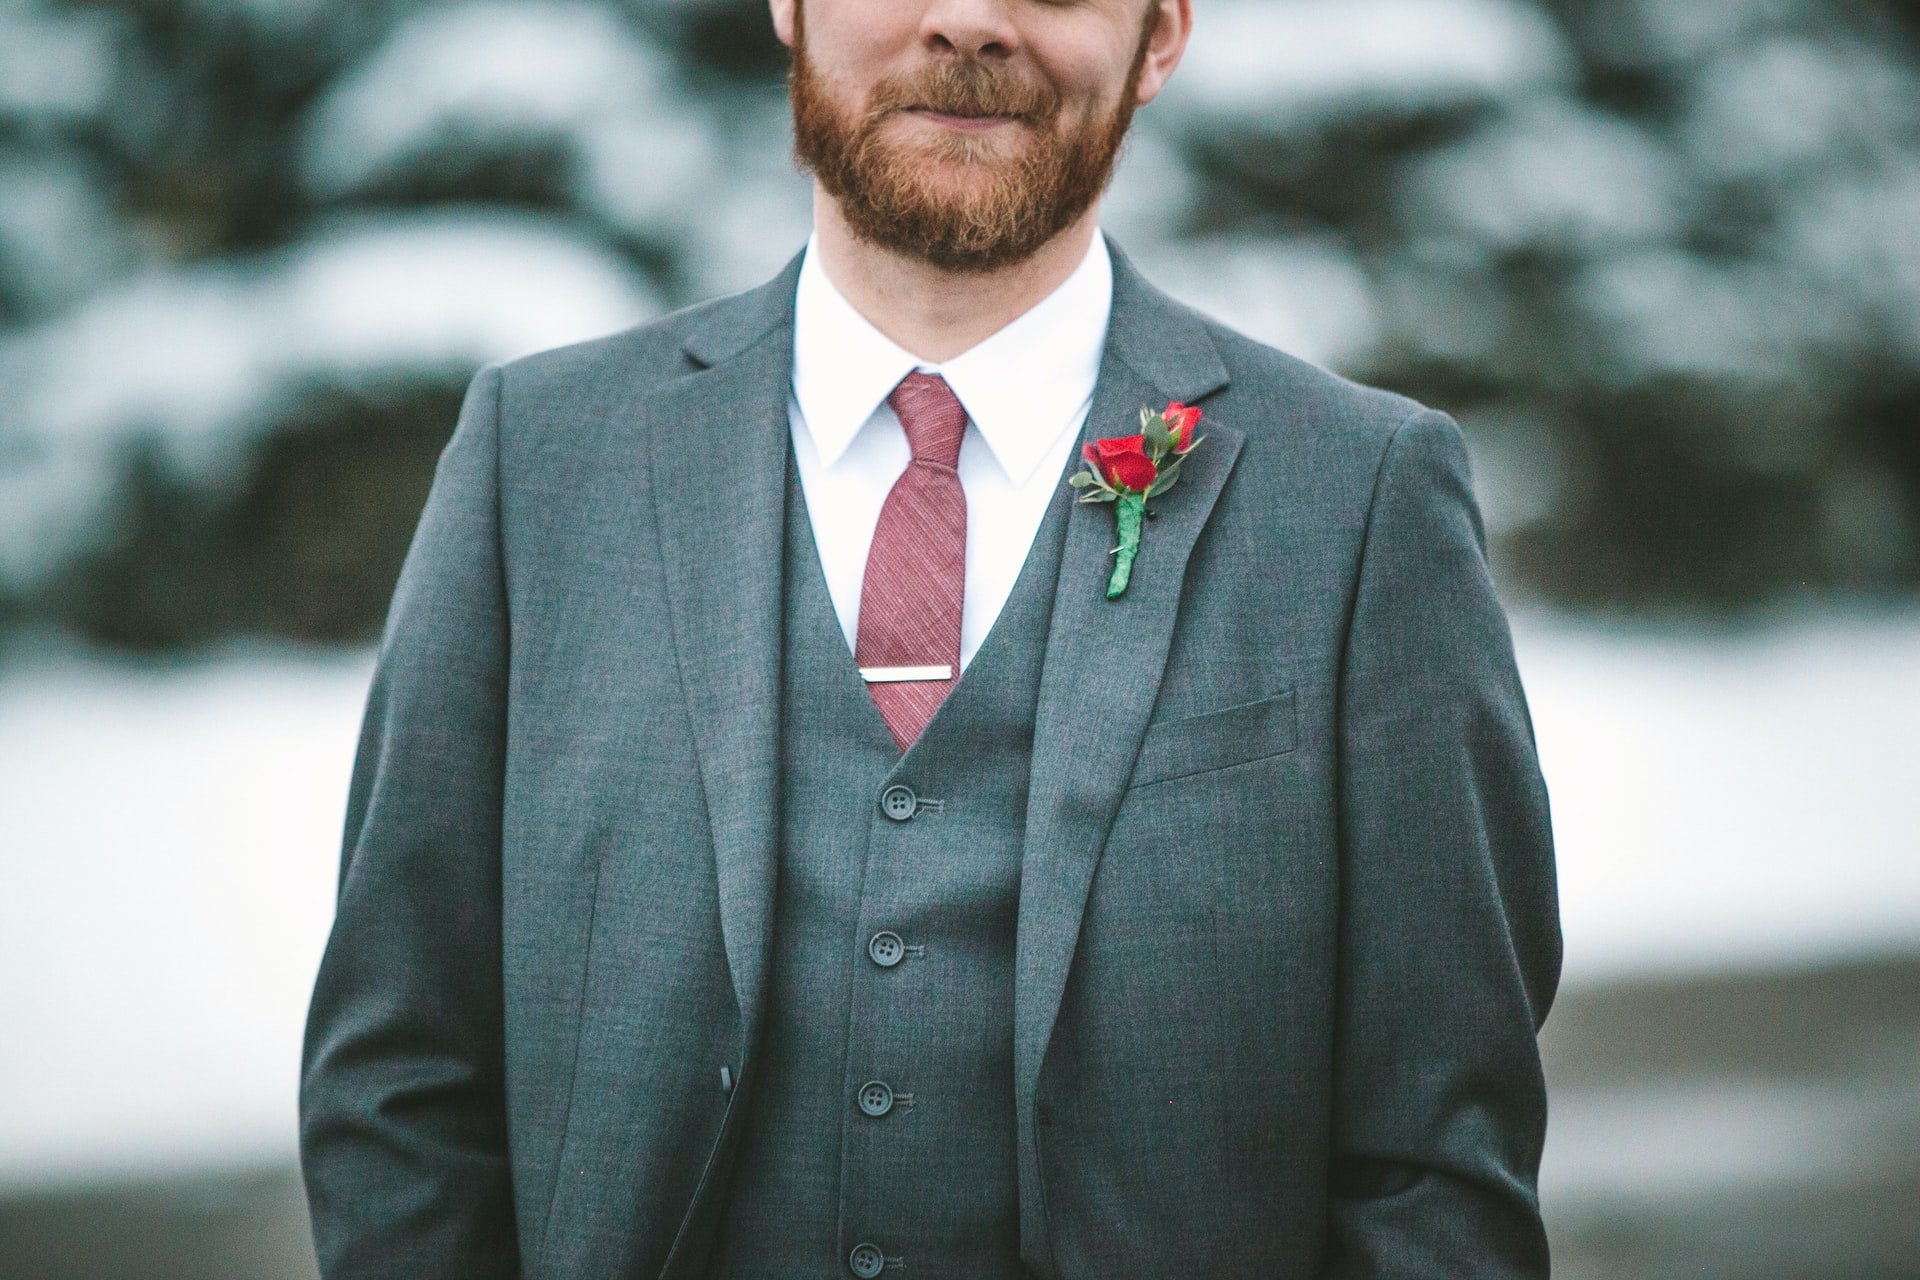 OP planned to be the best man on his best friend's wedding | Source: Unsplash